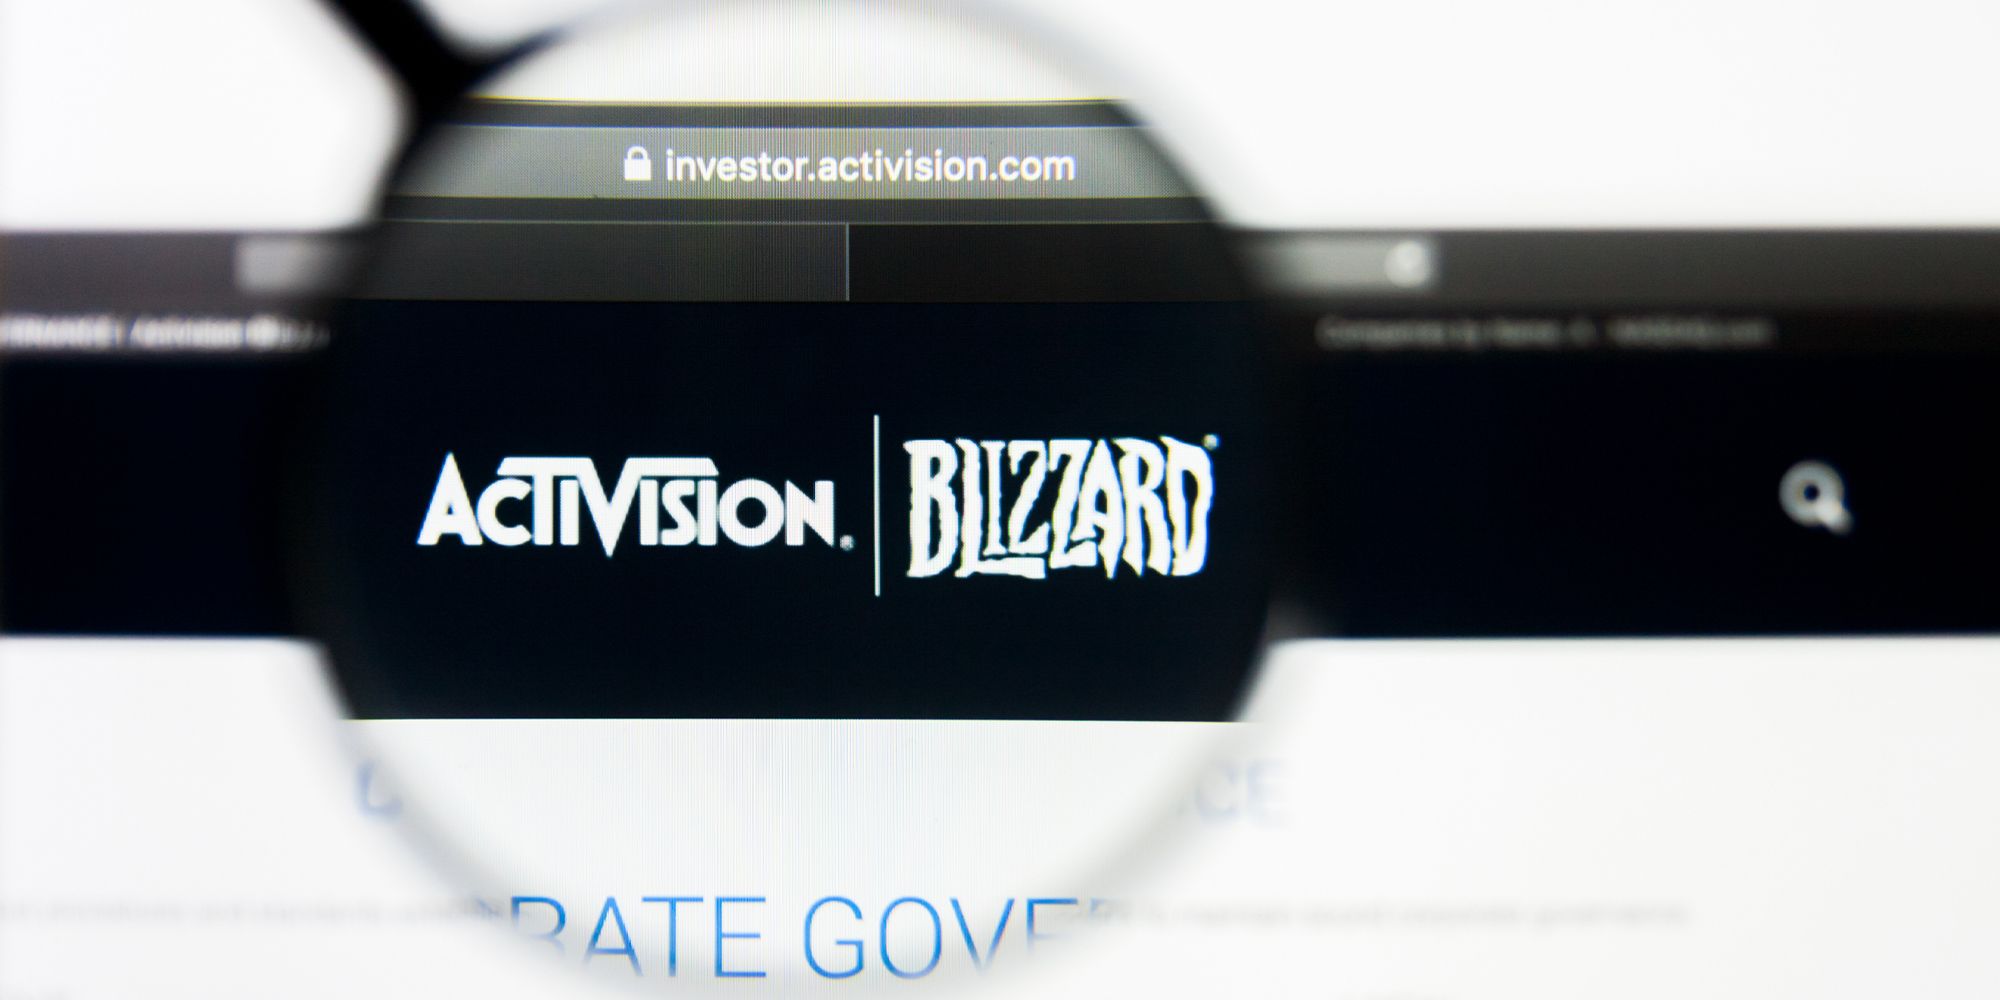 Magnifying glass placed over a website, highlighting the Activision Blizzard logo